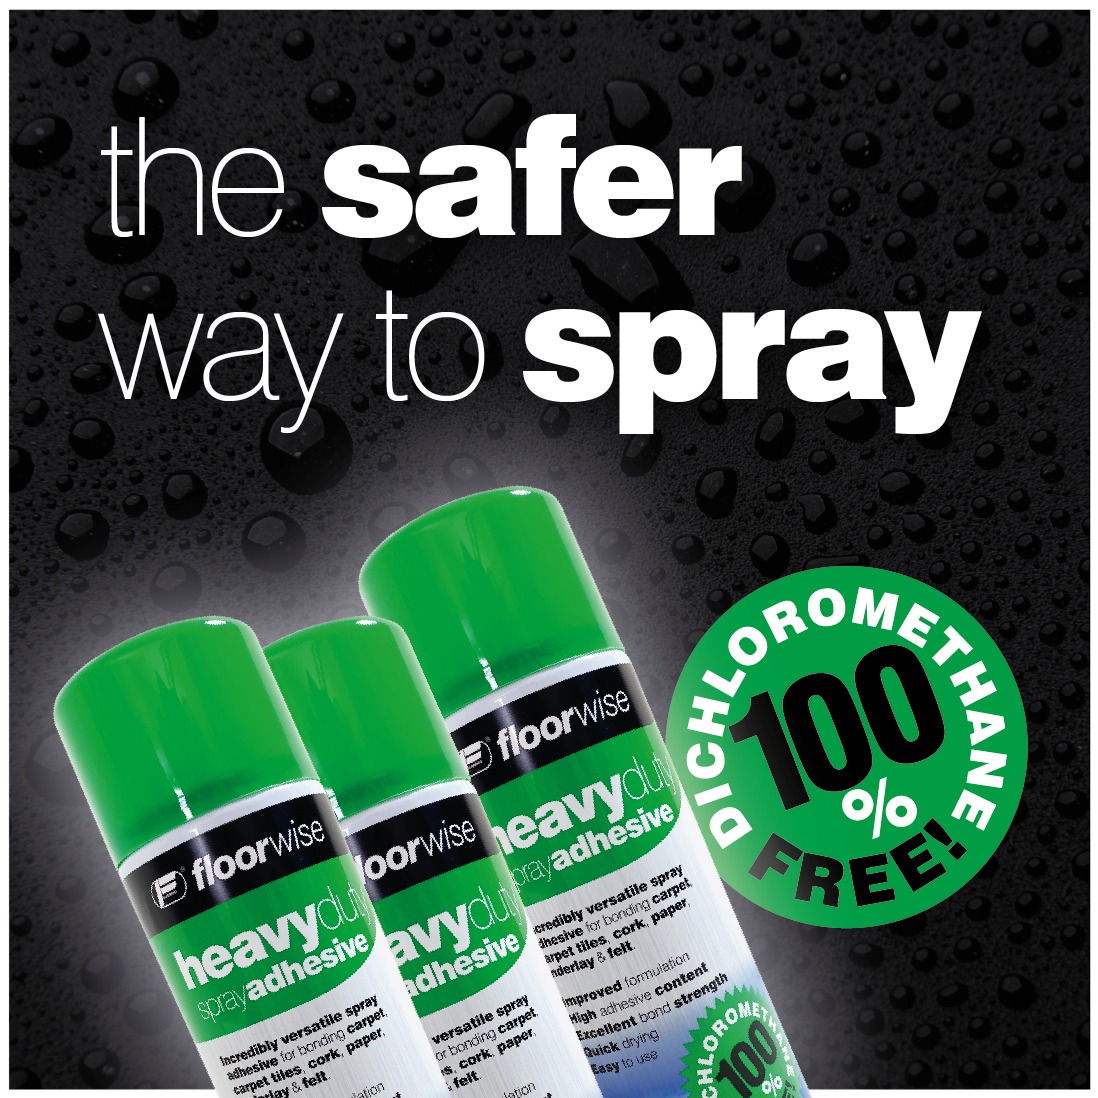 The Safer Way to Spray with FloorwiseHQ Introducing the revolutionary Floorwise F597 Heavy Duty Spray Adhesive! Say goodbye to harmful chemicals and hello to a safer and healthier spray experience. Click below to read more: floorwise.co.uk/product/f597-d…